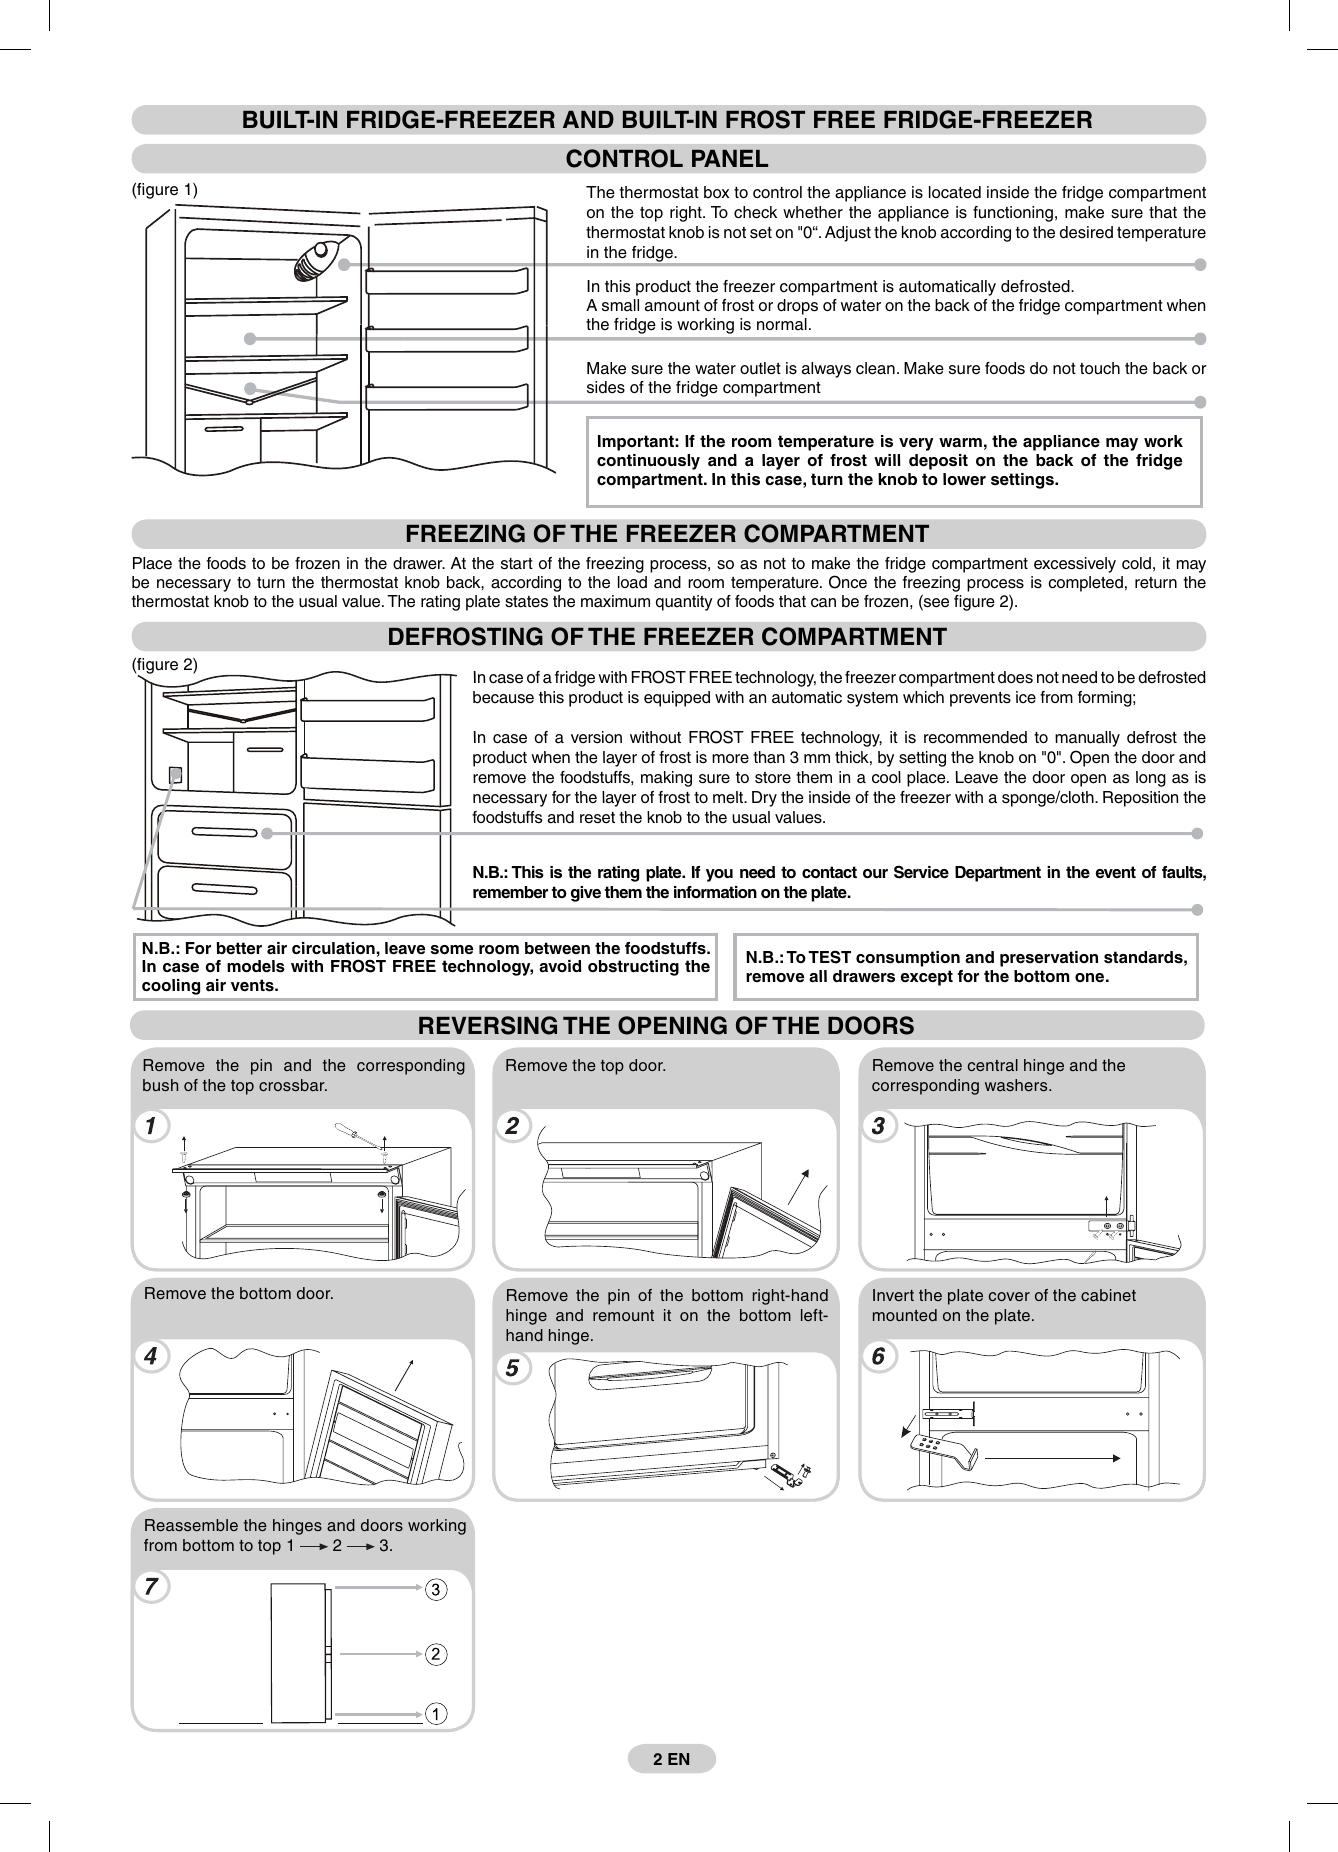 Page 3 of 5 - Hoover Frost Free Fully Integrated Fridge Freezer HFFB 3050AK Instruction Manual - Product Code 34900186 HFFB3050AK